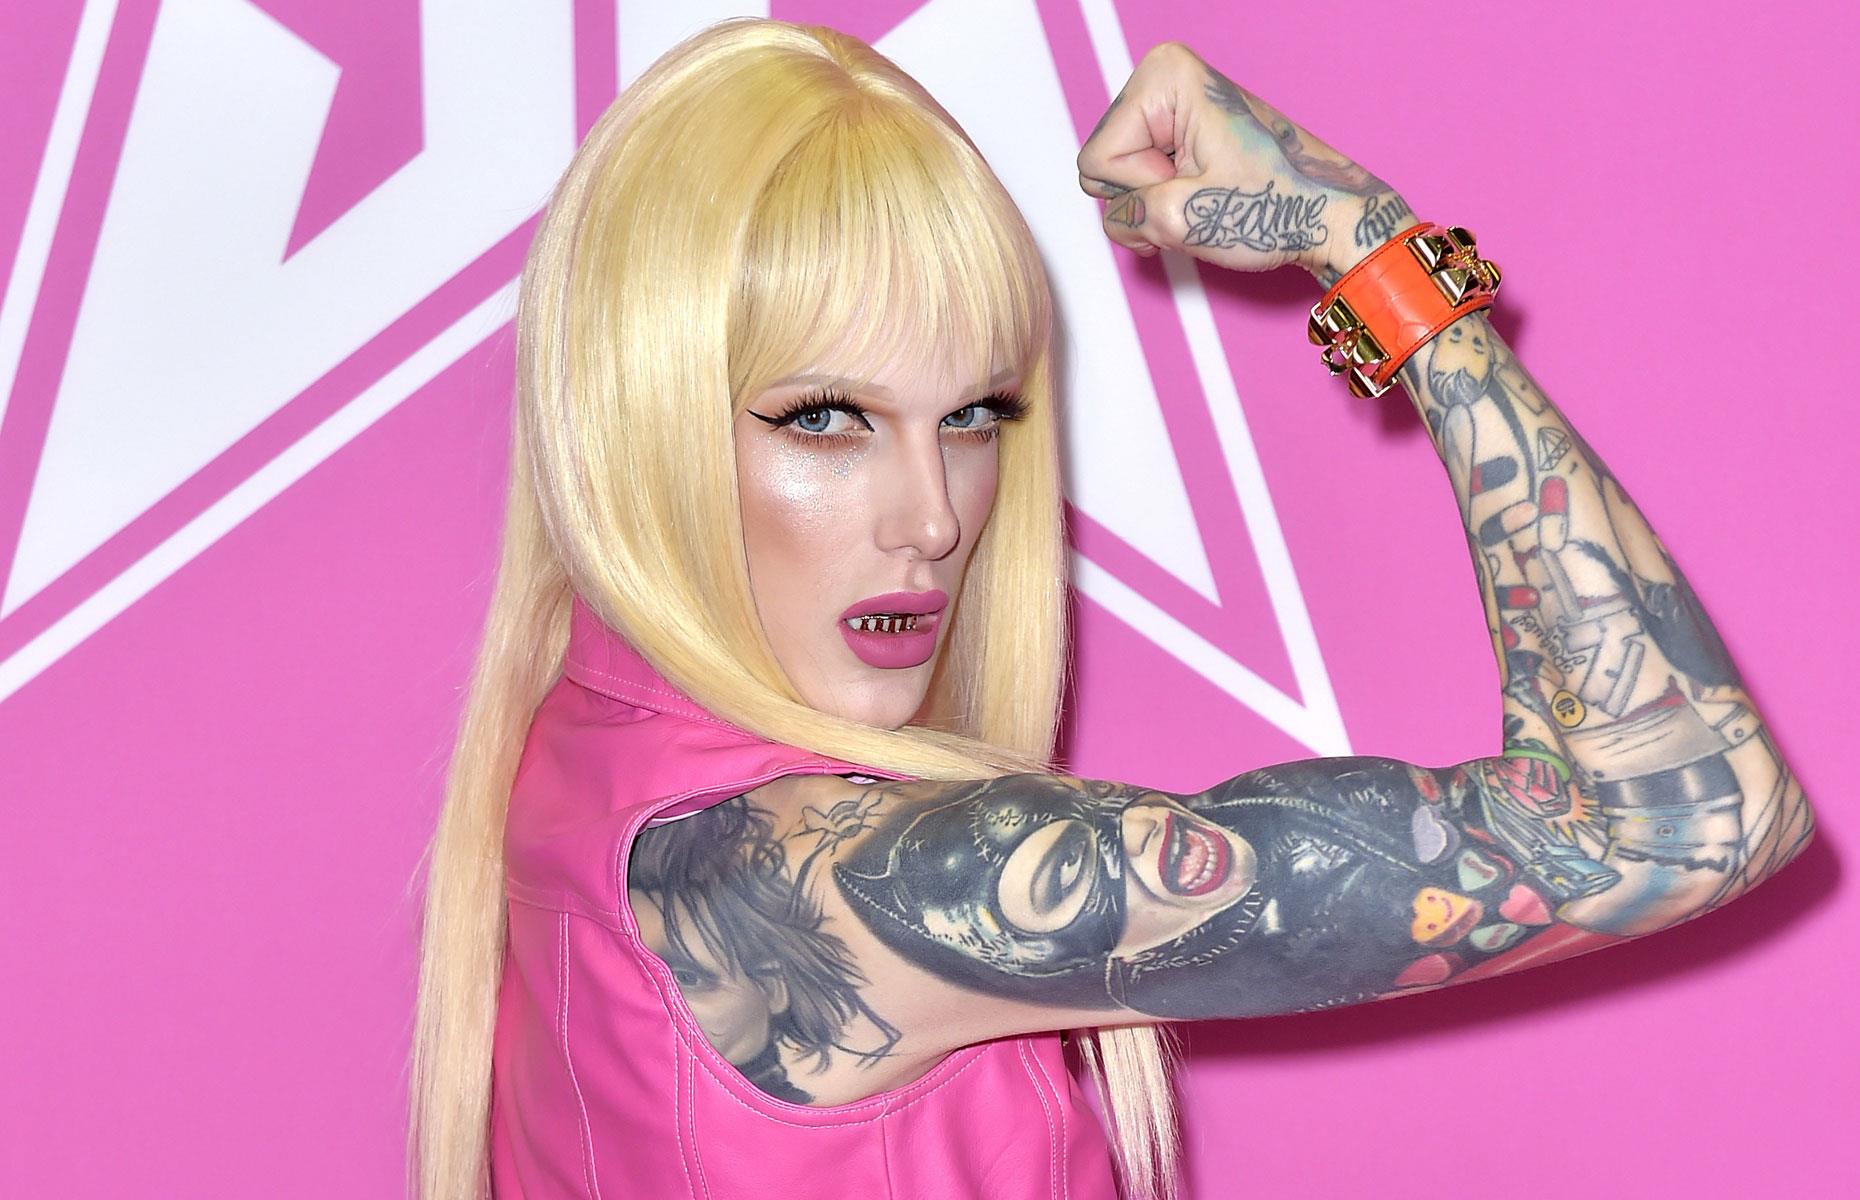 The Jeffree Star makeup worth over $2.5 million (£1.9m)